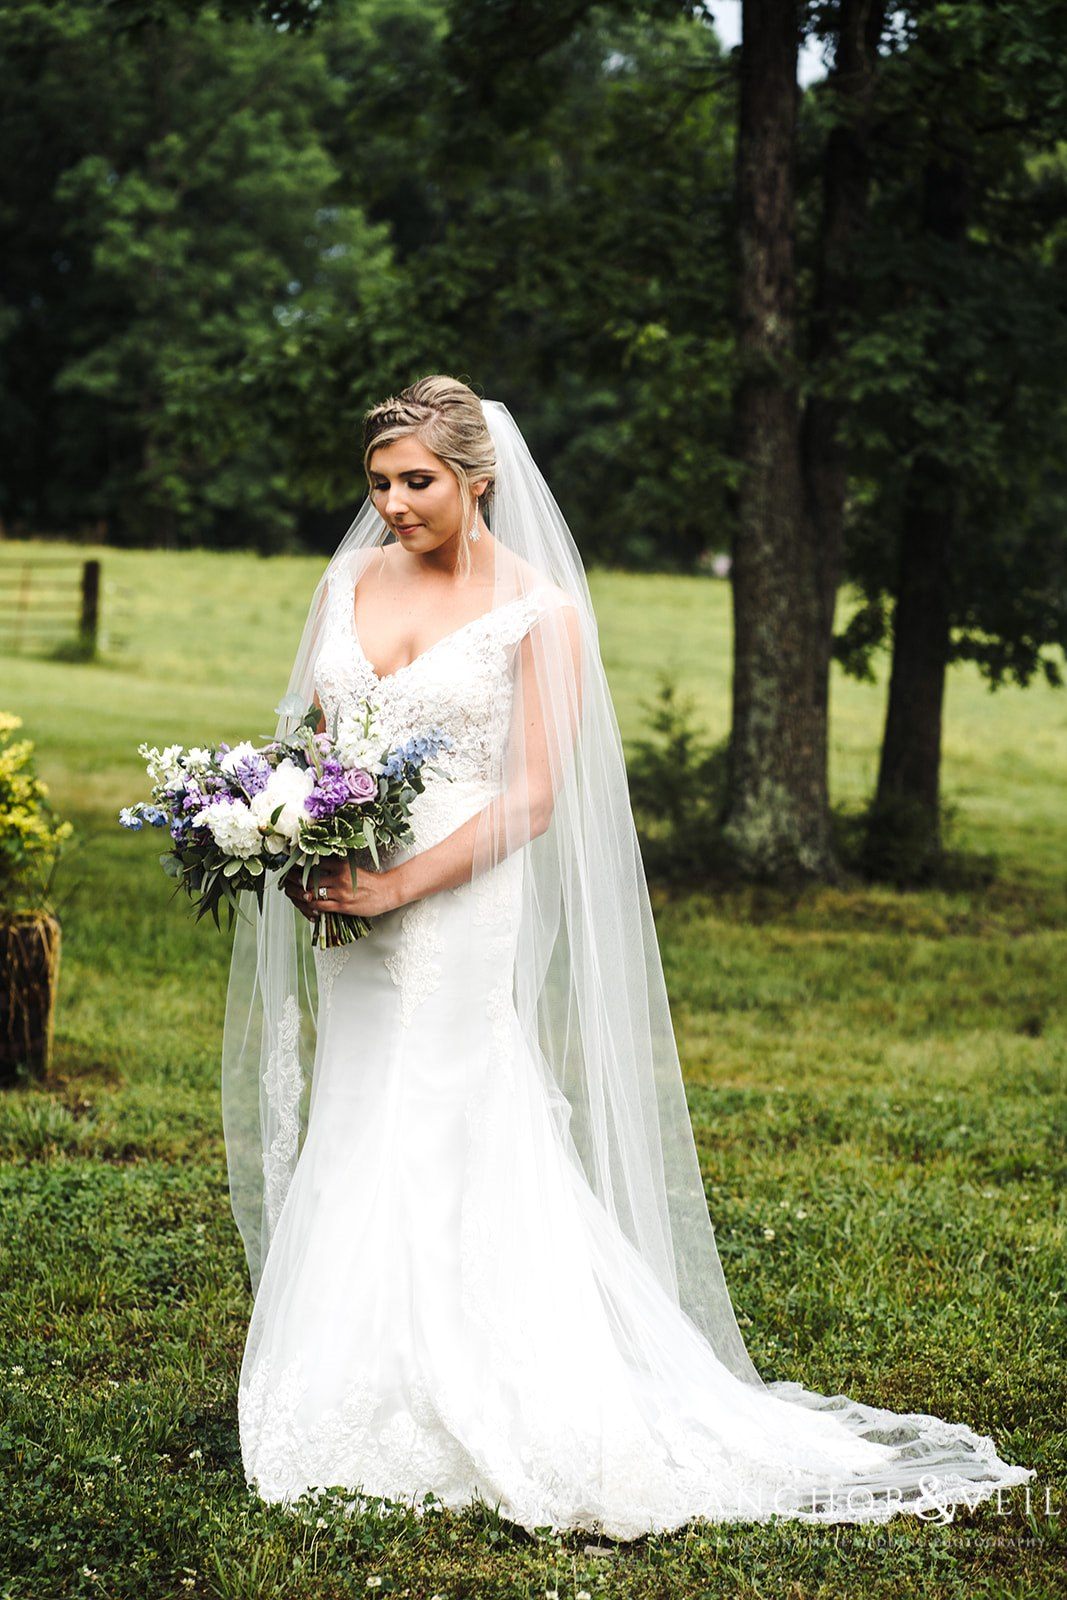 The Bride in her dress and veil at The Farm at Brusharbor Wedding